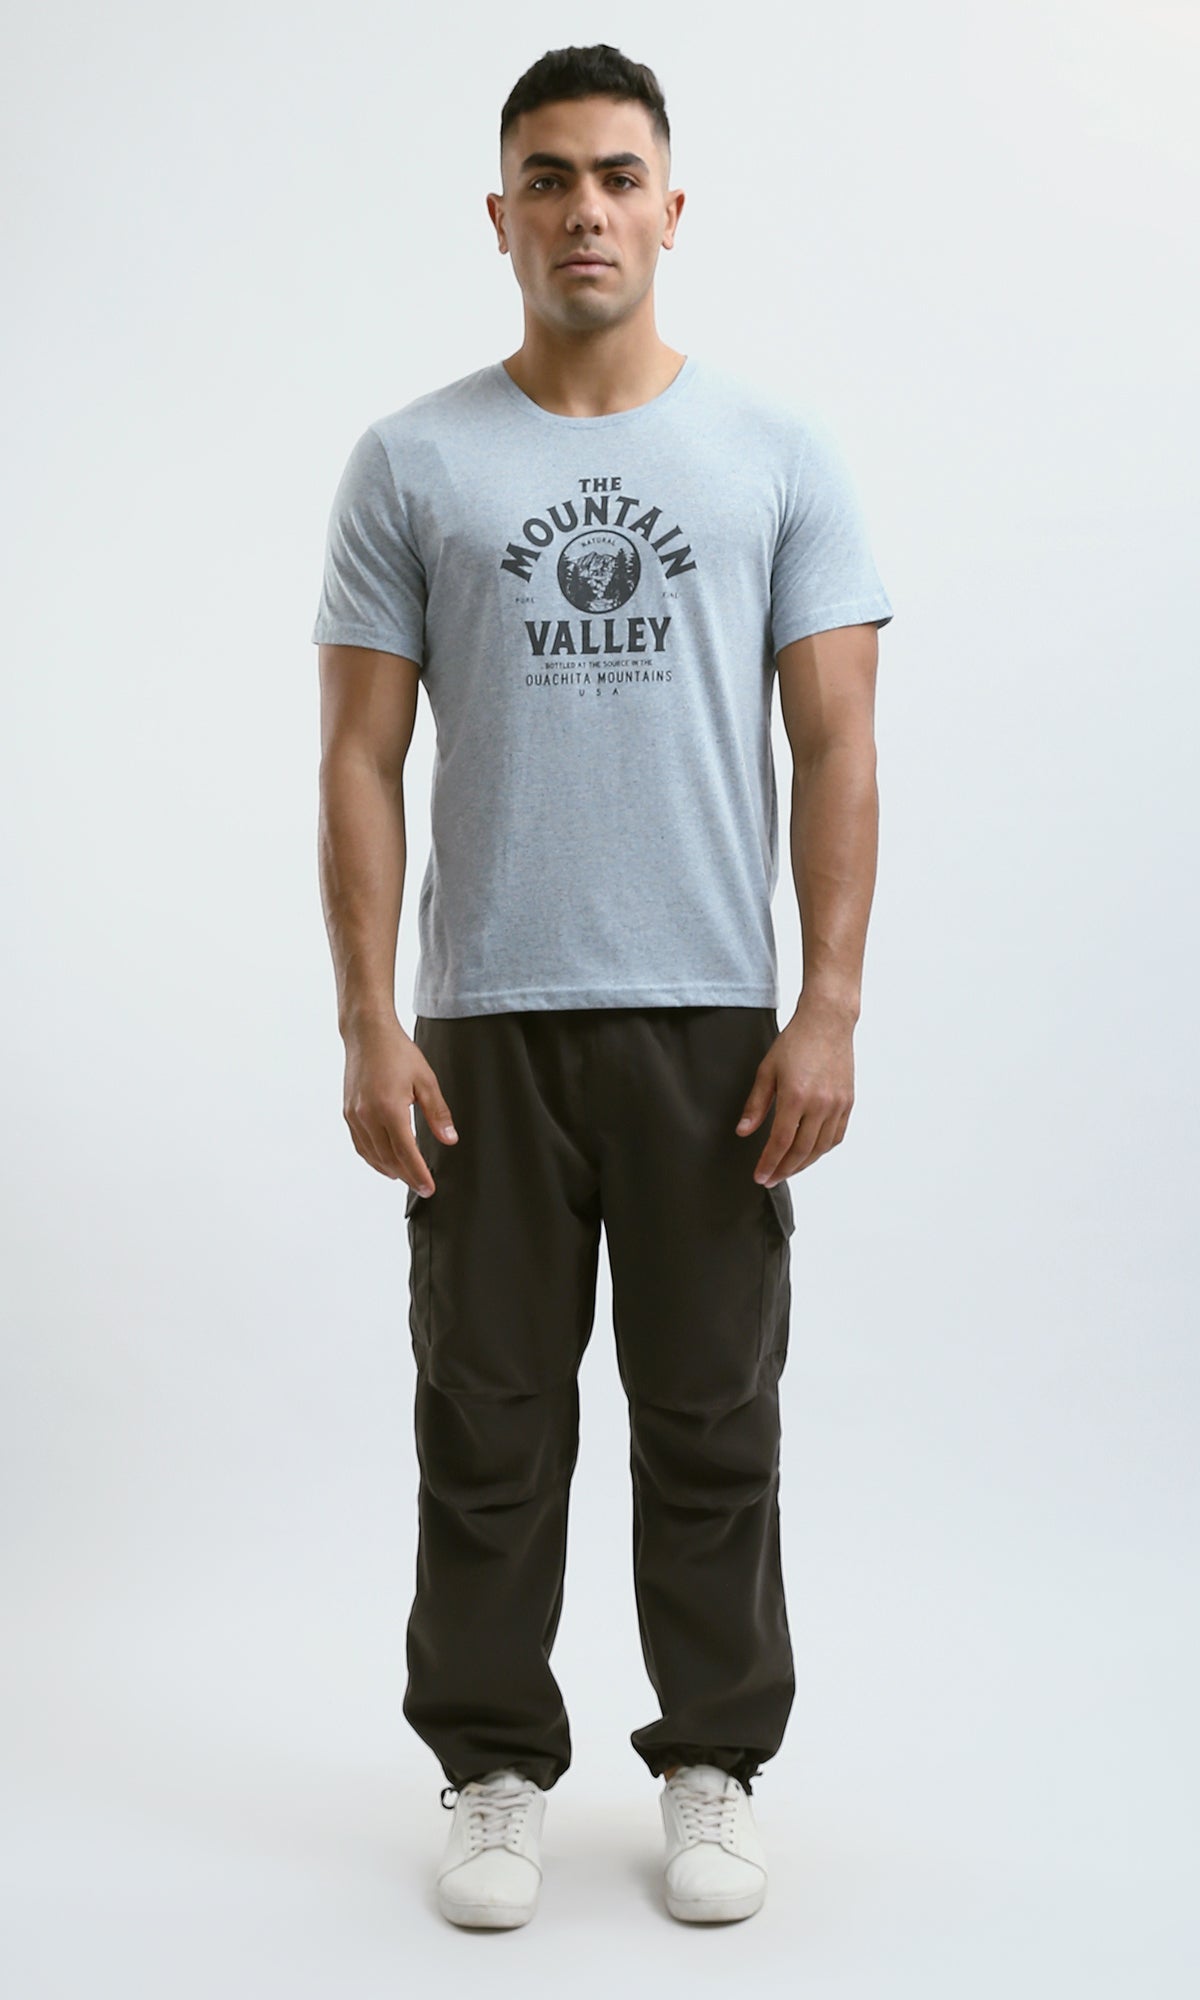 O182129 "The Mountain Valley" Printed Heather Light Blue Tee